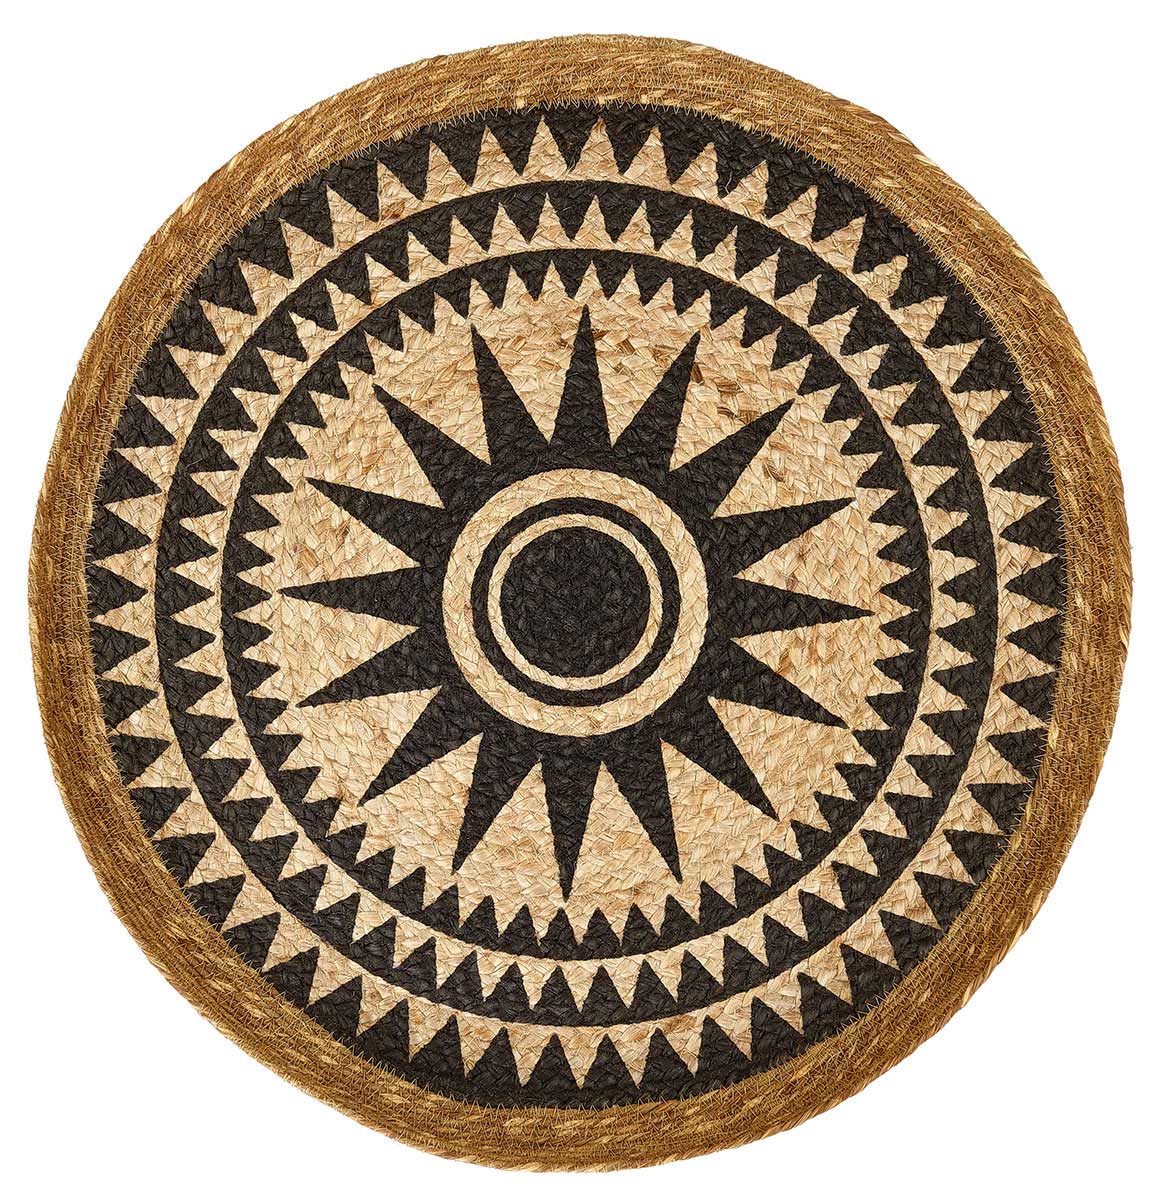 Small Round Jute Disc with Star Design